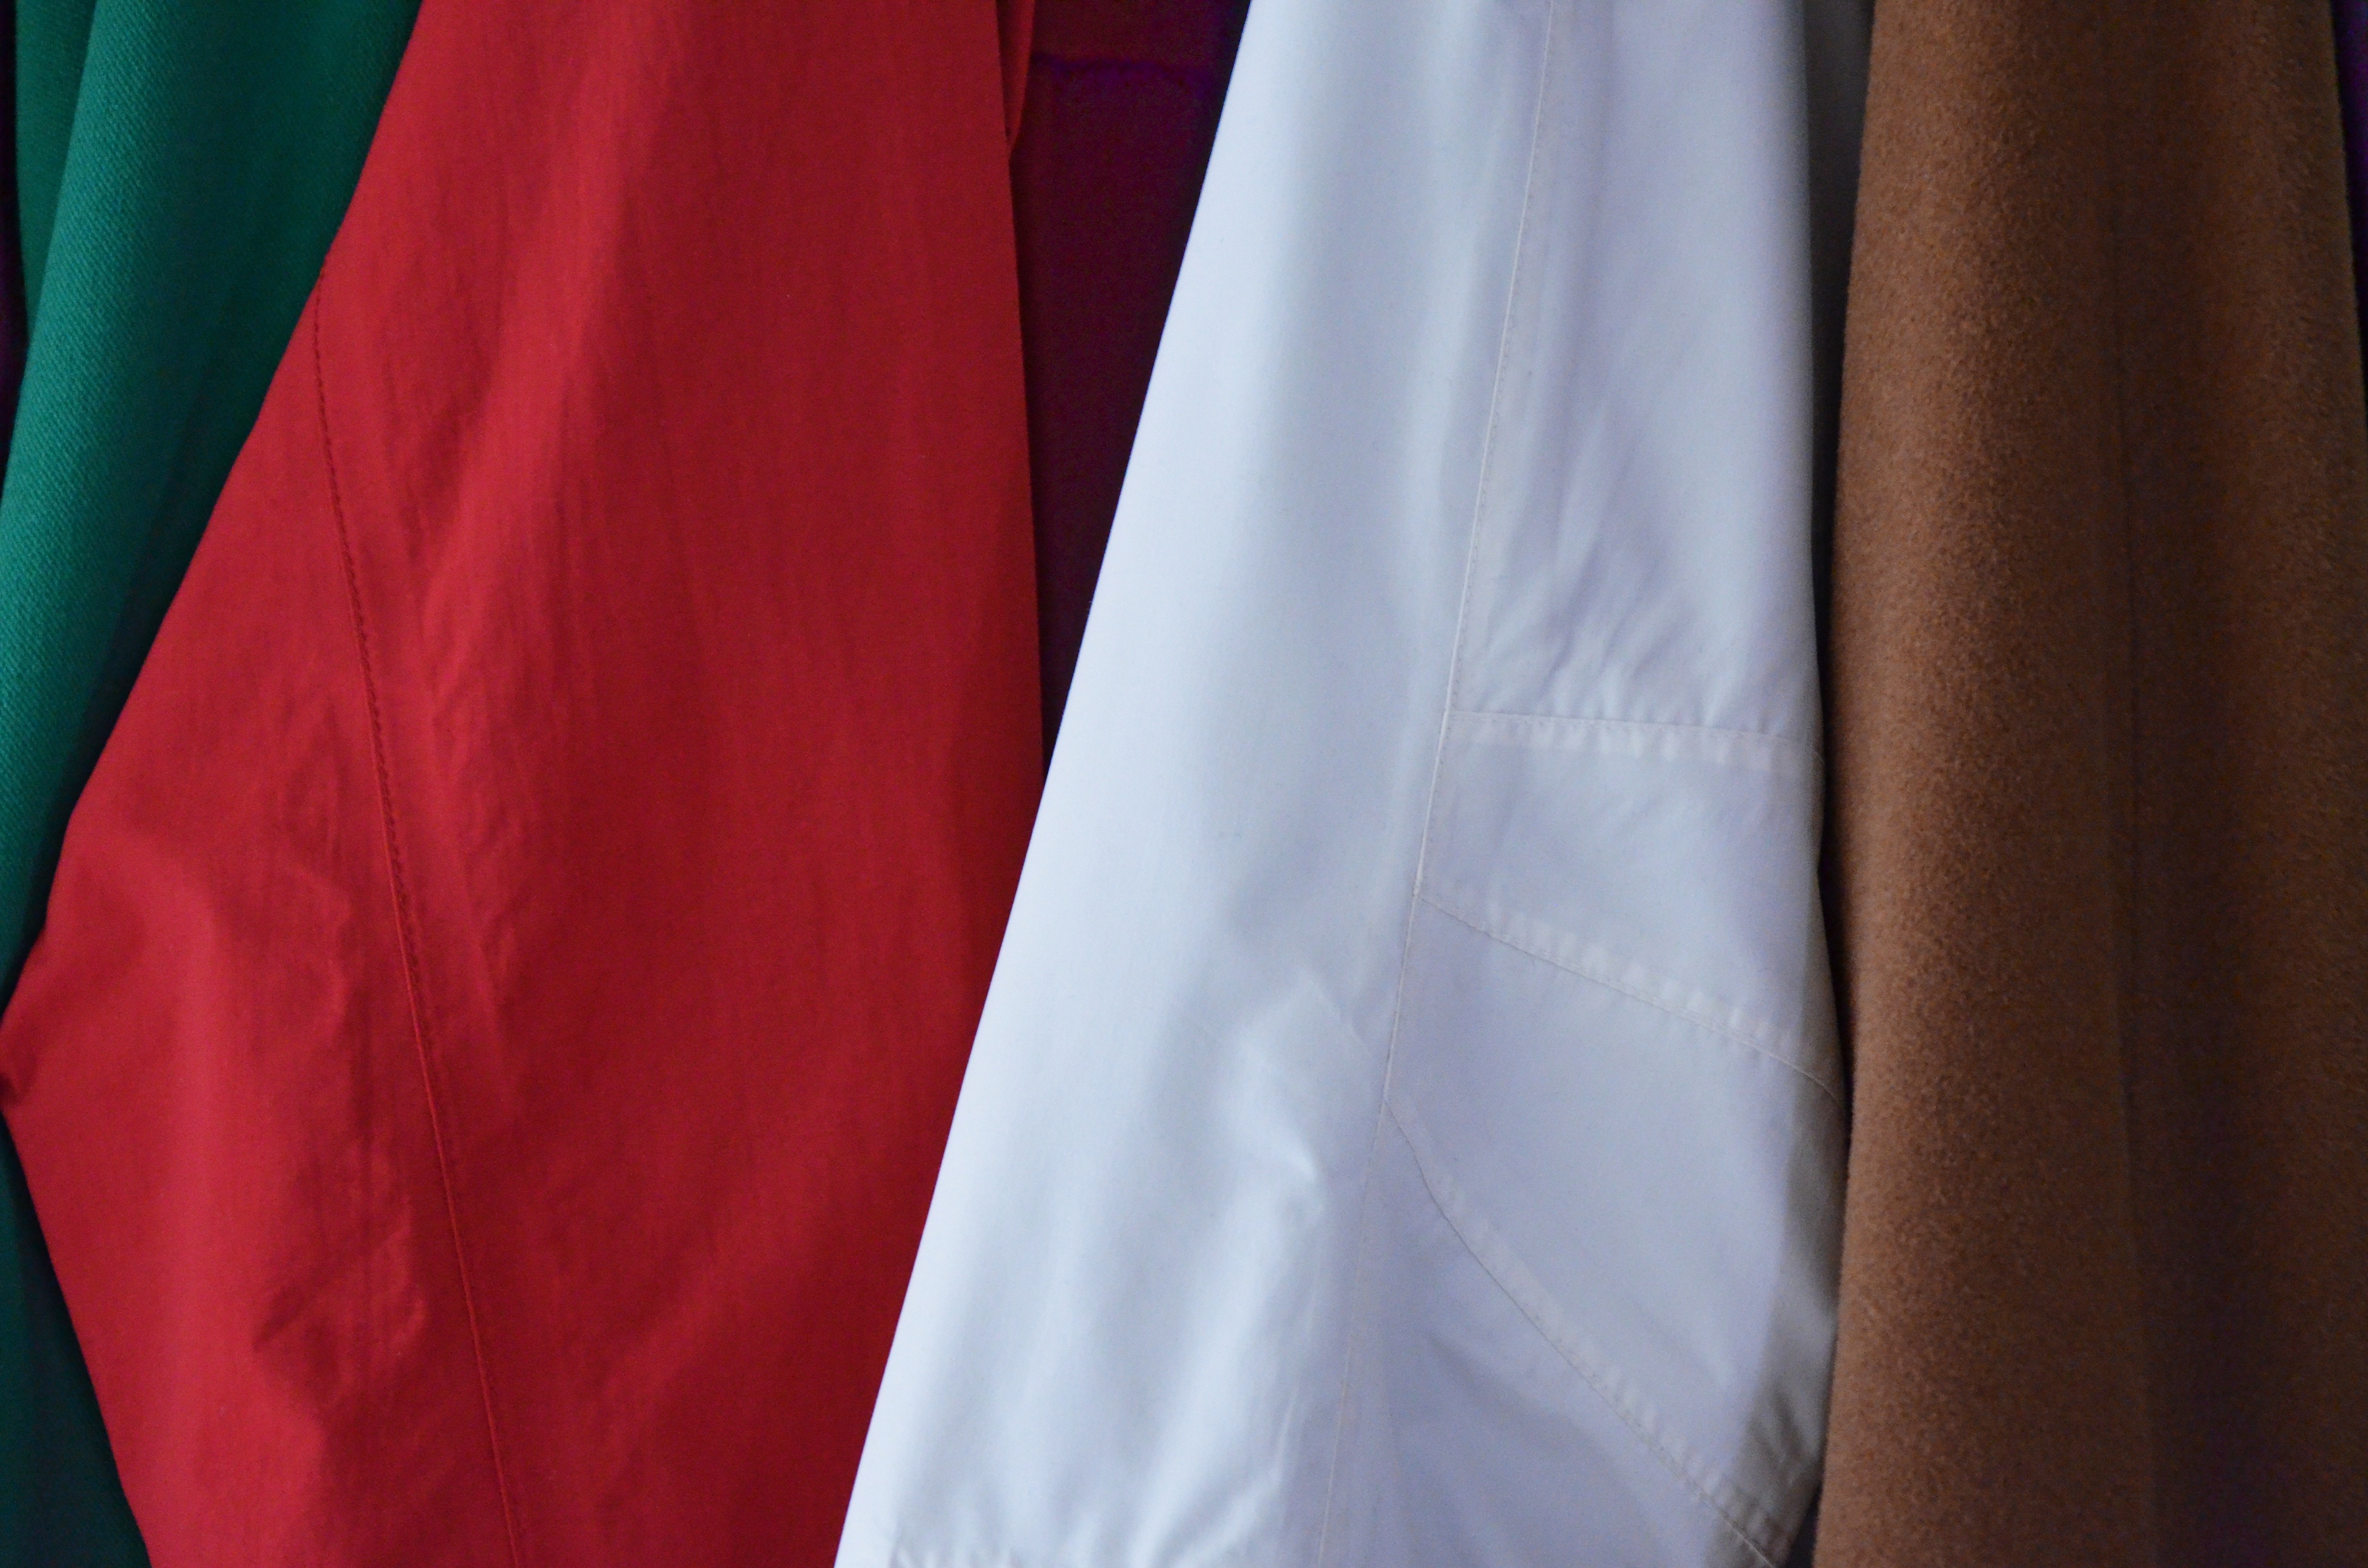 green, red, white and brown textiles